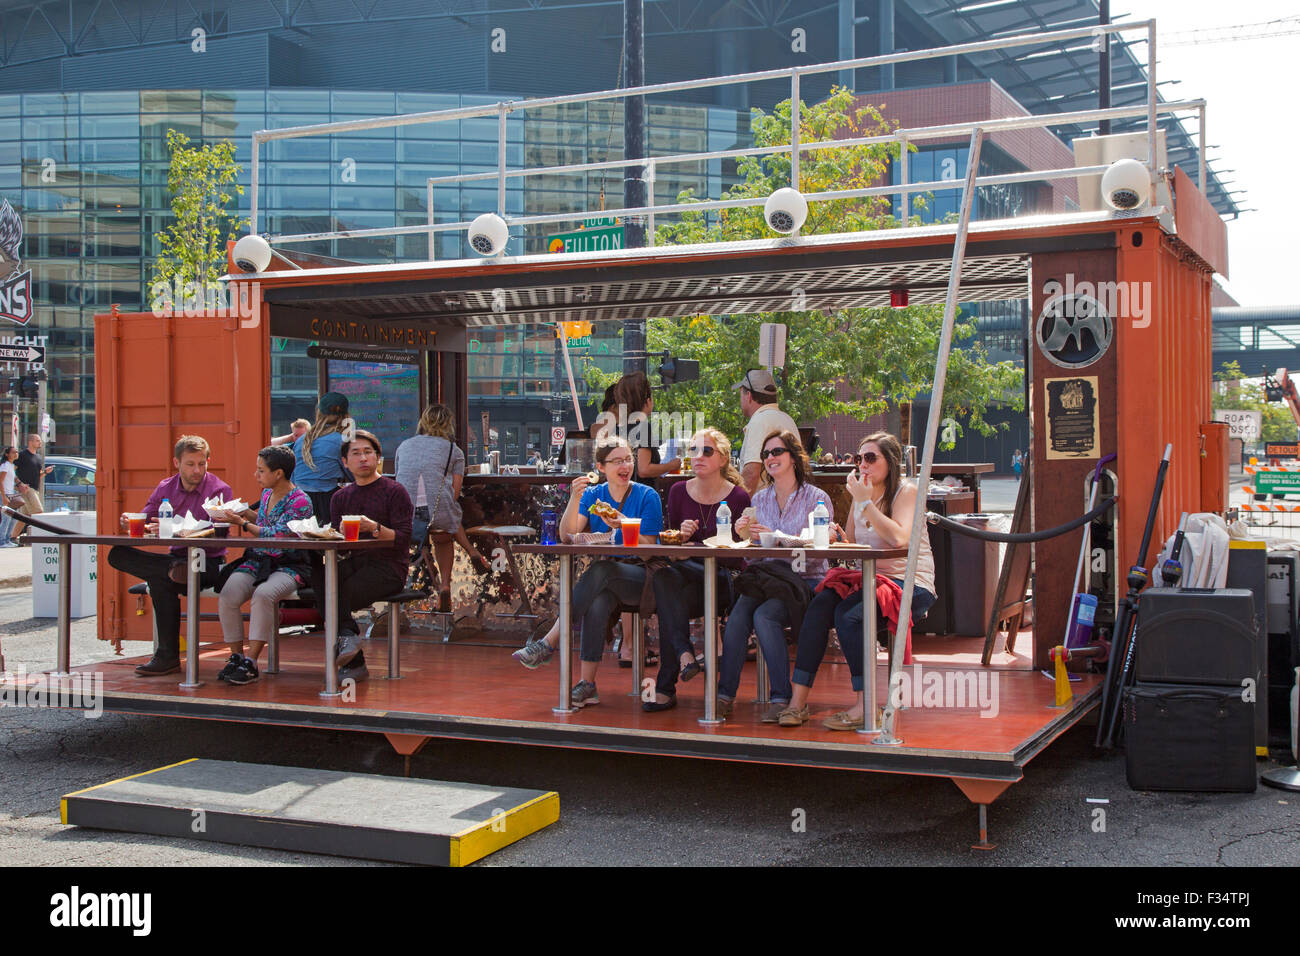 Grand Rapids, Michigan - A shipping container converted to a bar/restaurant during the annual ArtPrize festival. Stock Photo